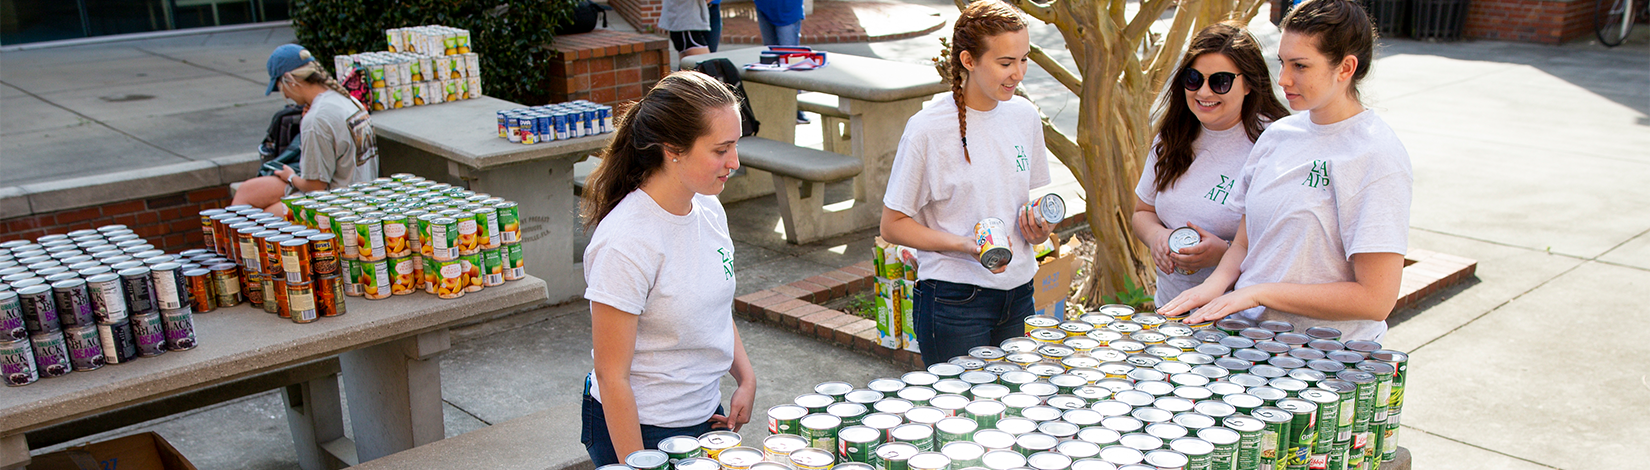 Four female students gather around a table full of cans outside. 